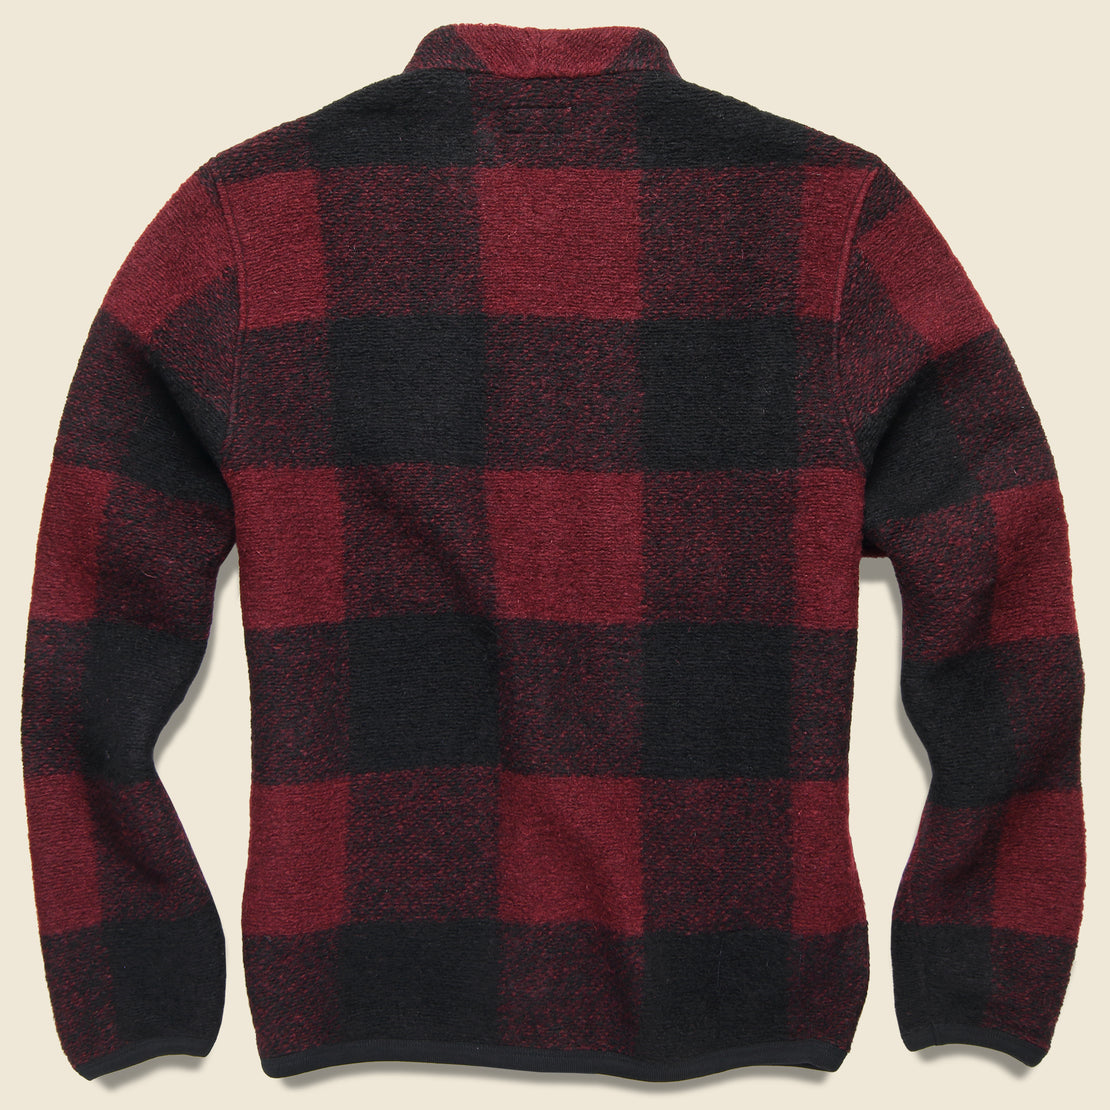 Wool Fleece Cardigan - Red Check - Universal Works - STAG Provisions - Tops - Sweater